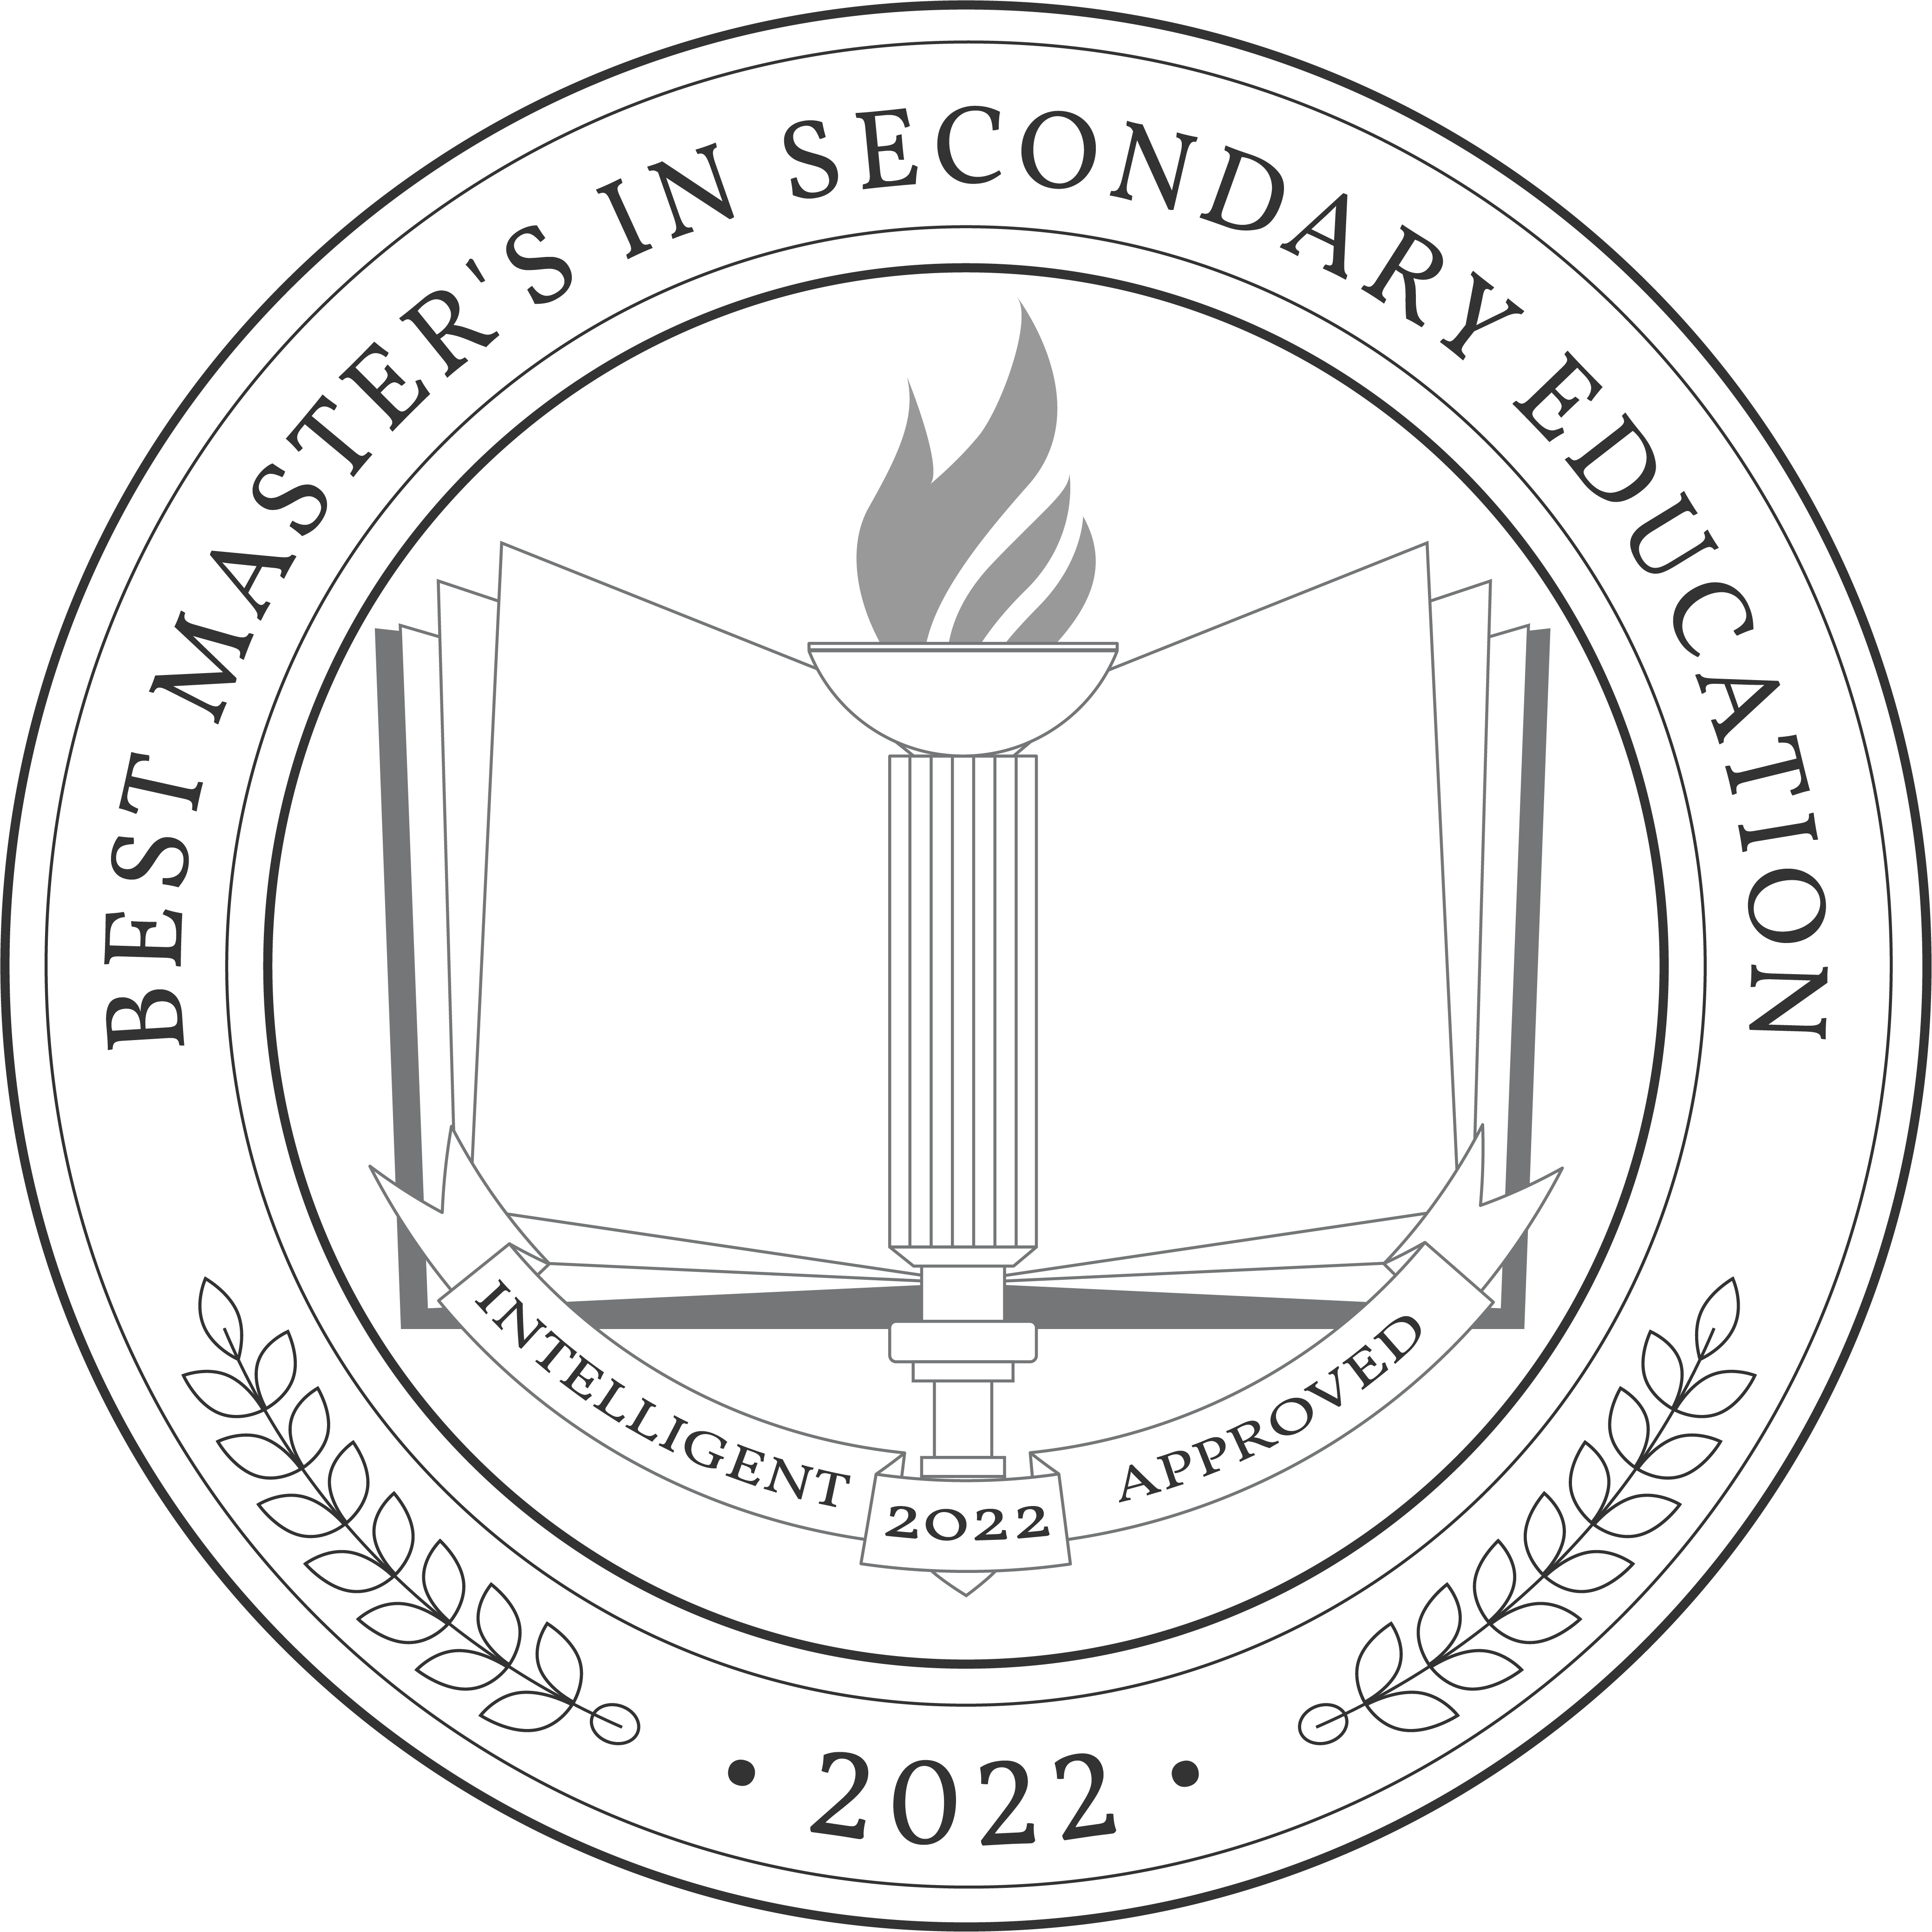 Best Master's in Secondary Education Badge